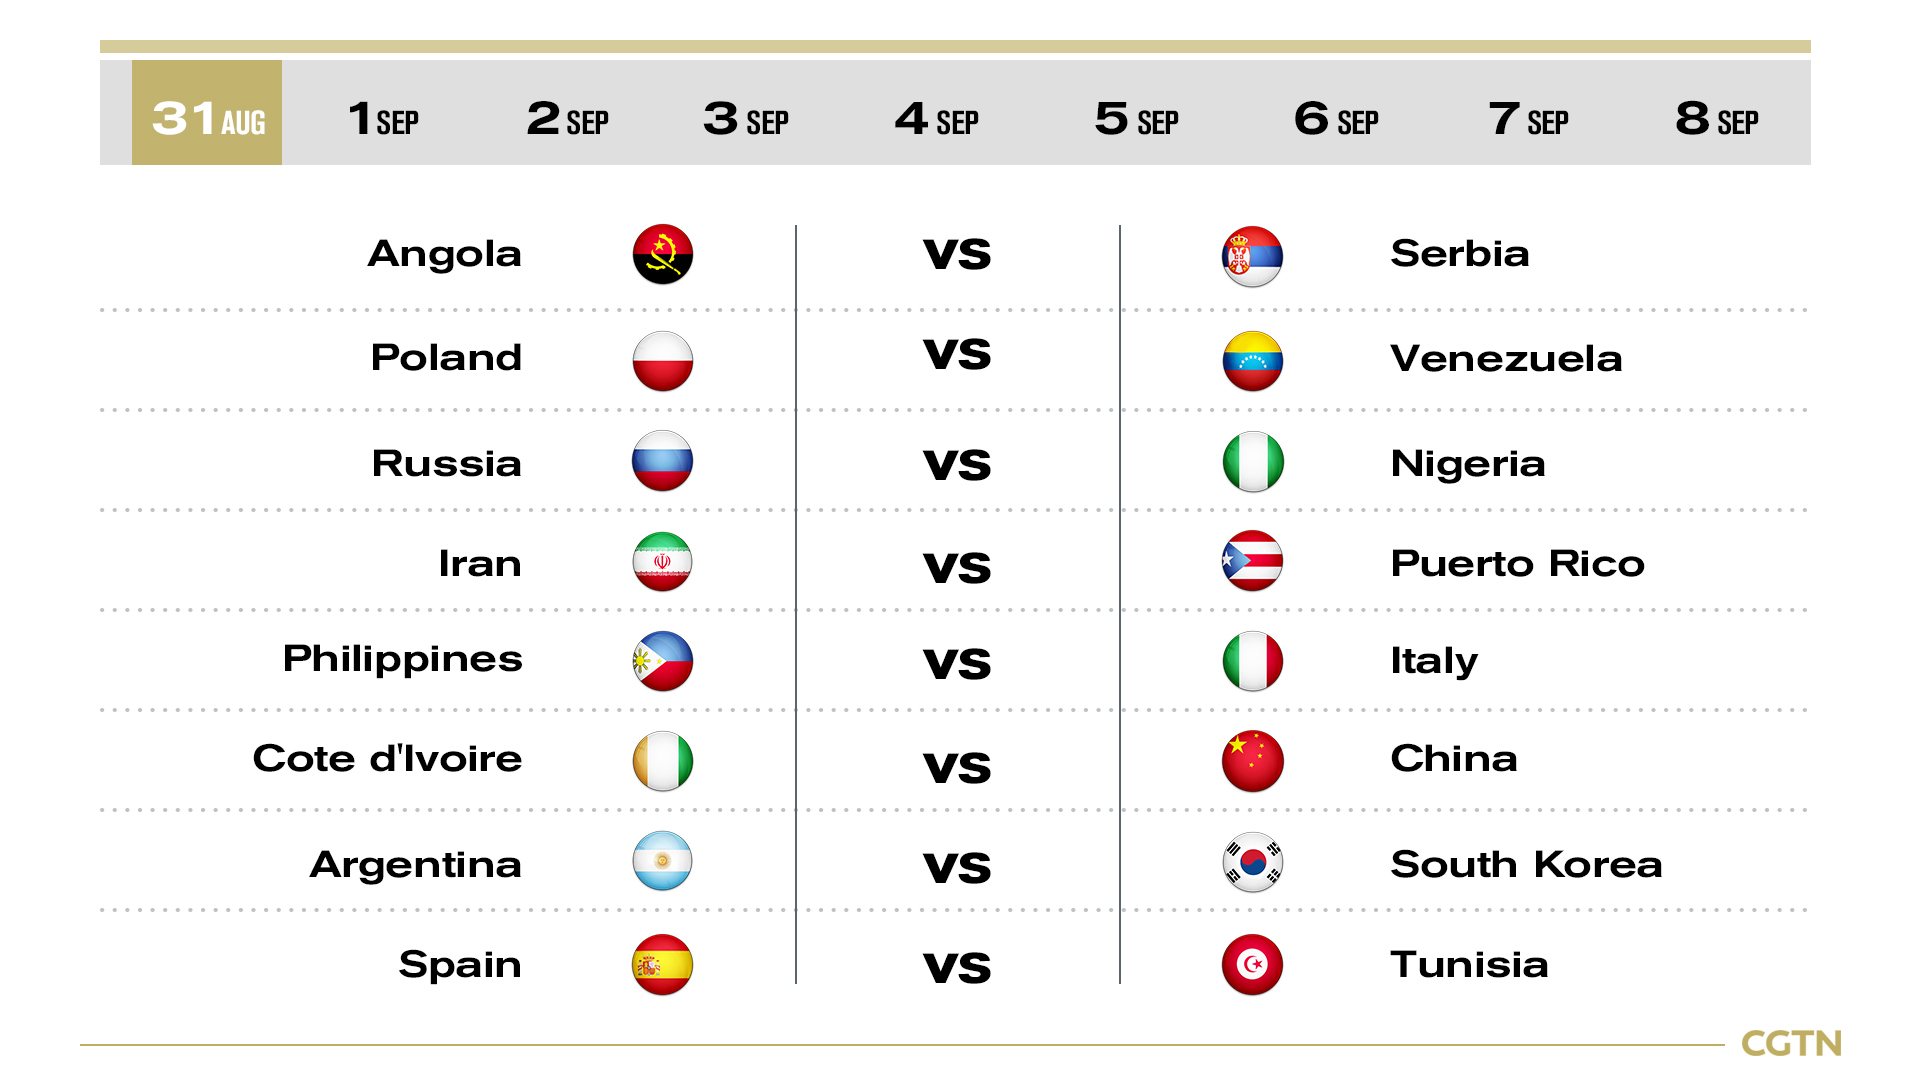 A specific game schedule for FIBA Basketball World Cup